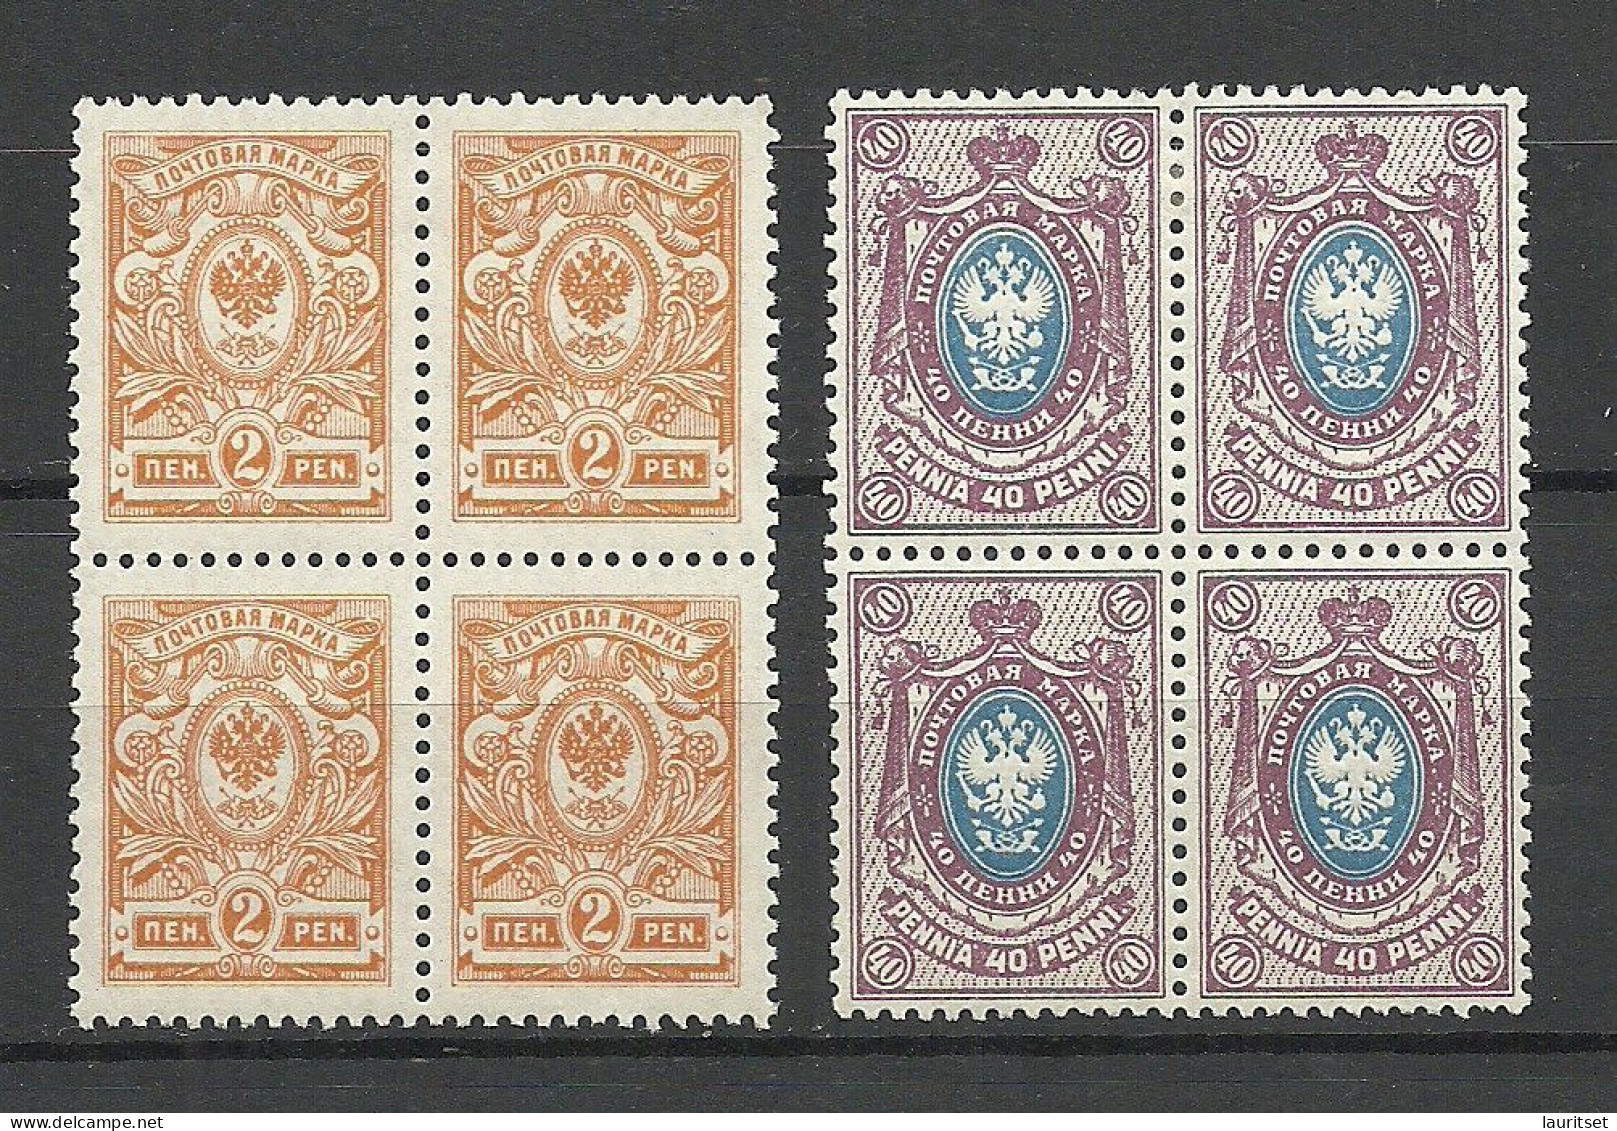 FINLAND FINNLAND 1911 Michel 61 & 65 As 4-blocks MNH/MH (2 Upper Stamps Are MNH/**, Lower Row Is MH/*) - Nuevos